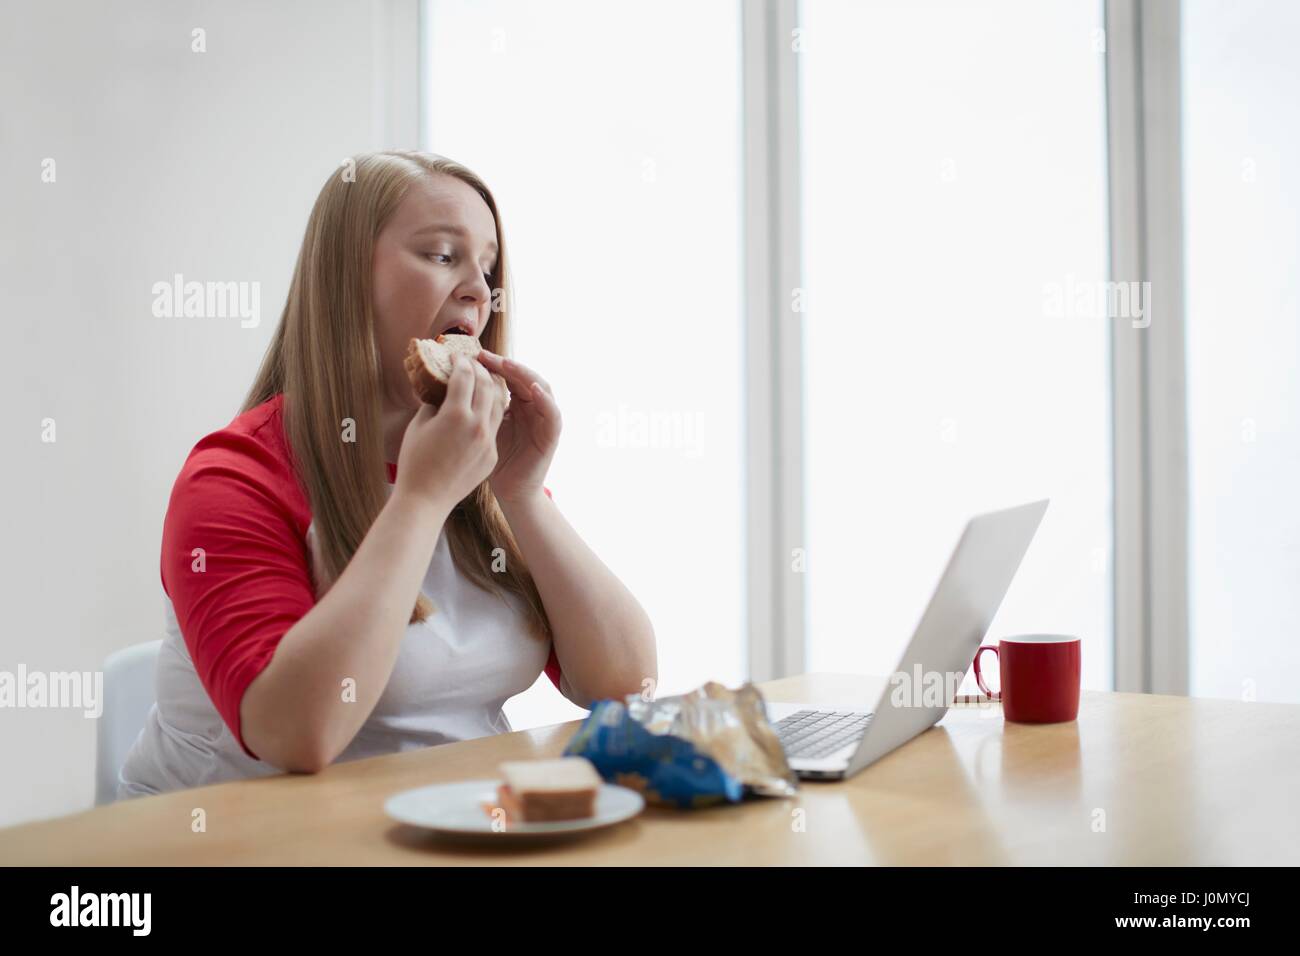 Young woman with laptop eating sandwich. Stock Photo